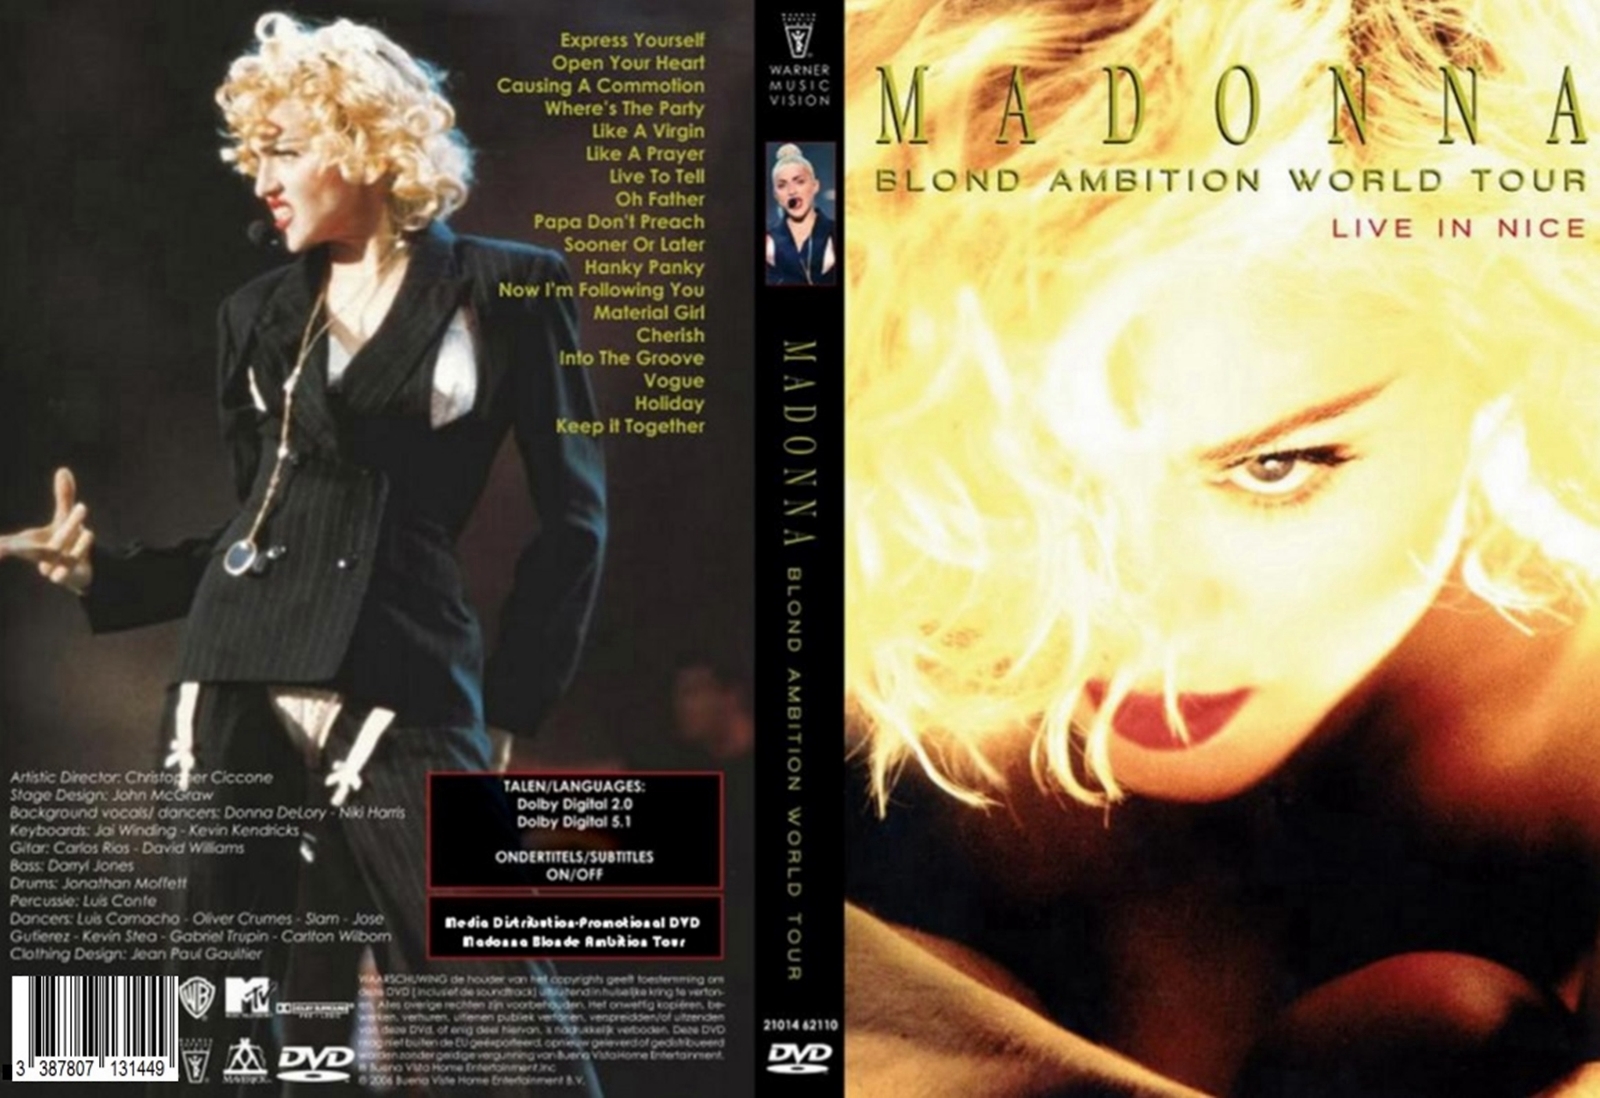 Madonna Blond Ambition World Tour Live Dvd And 50 Similar Items